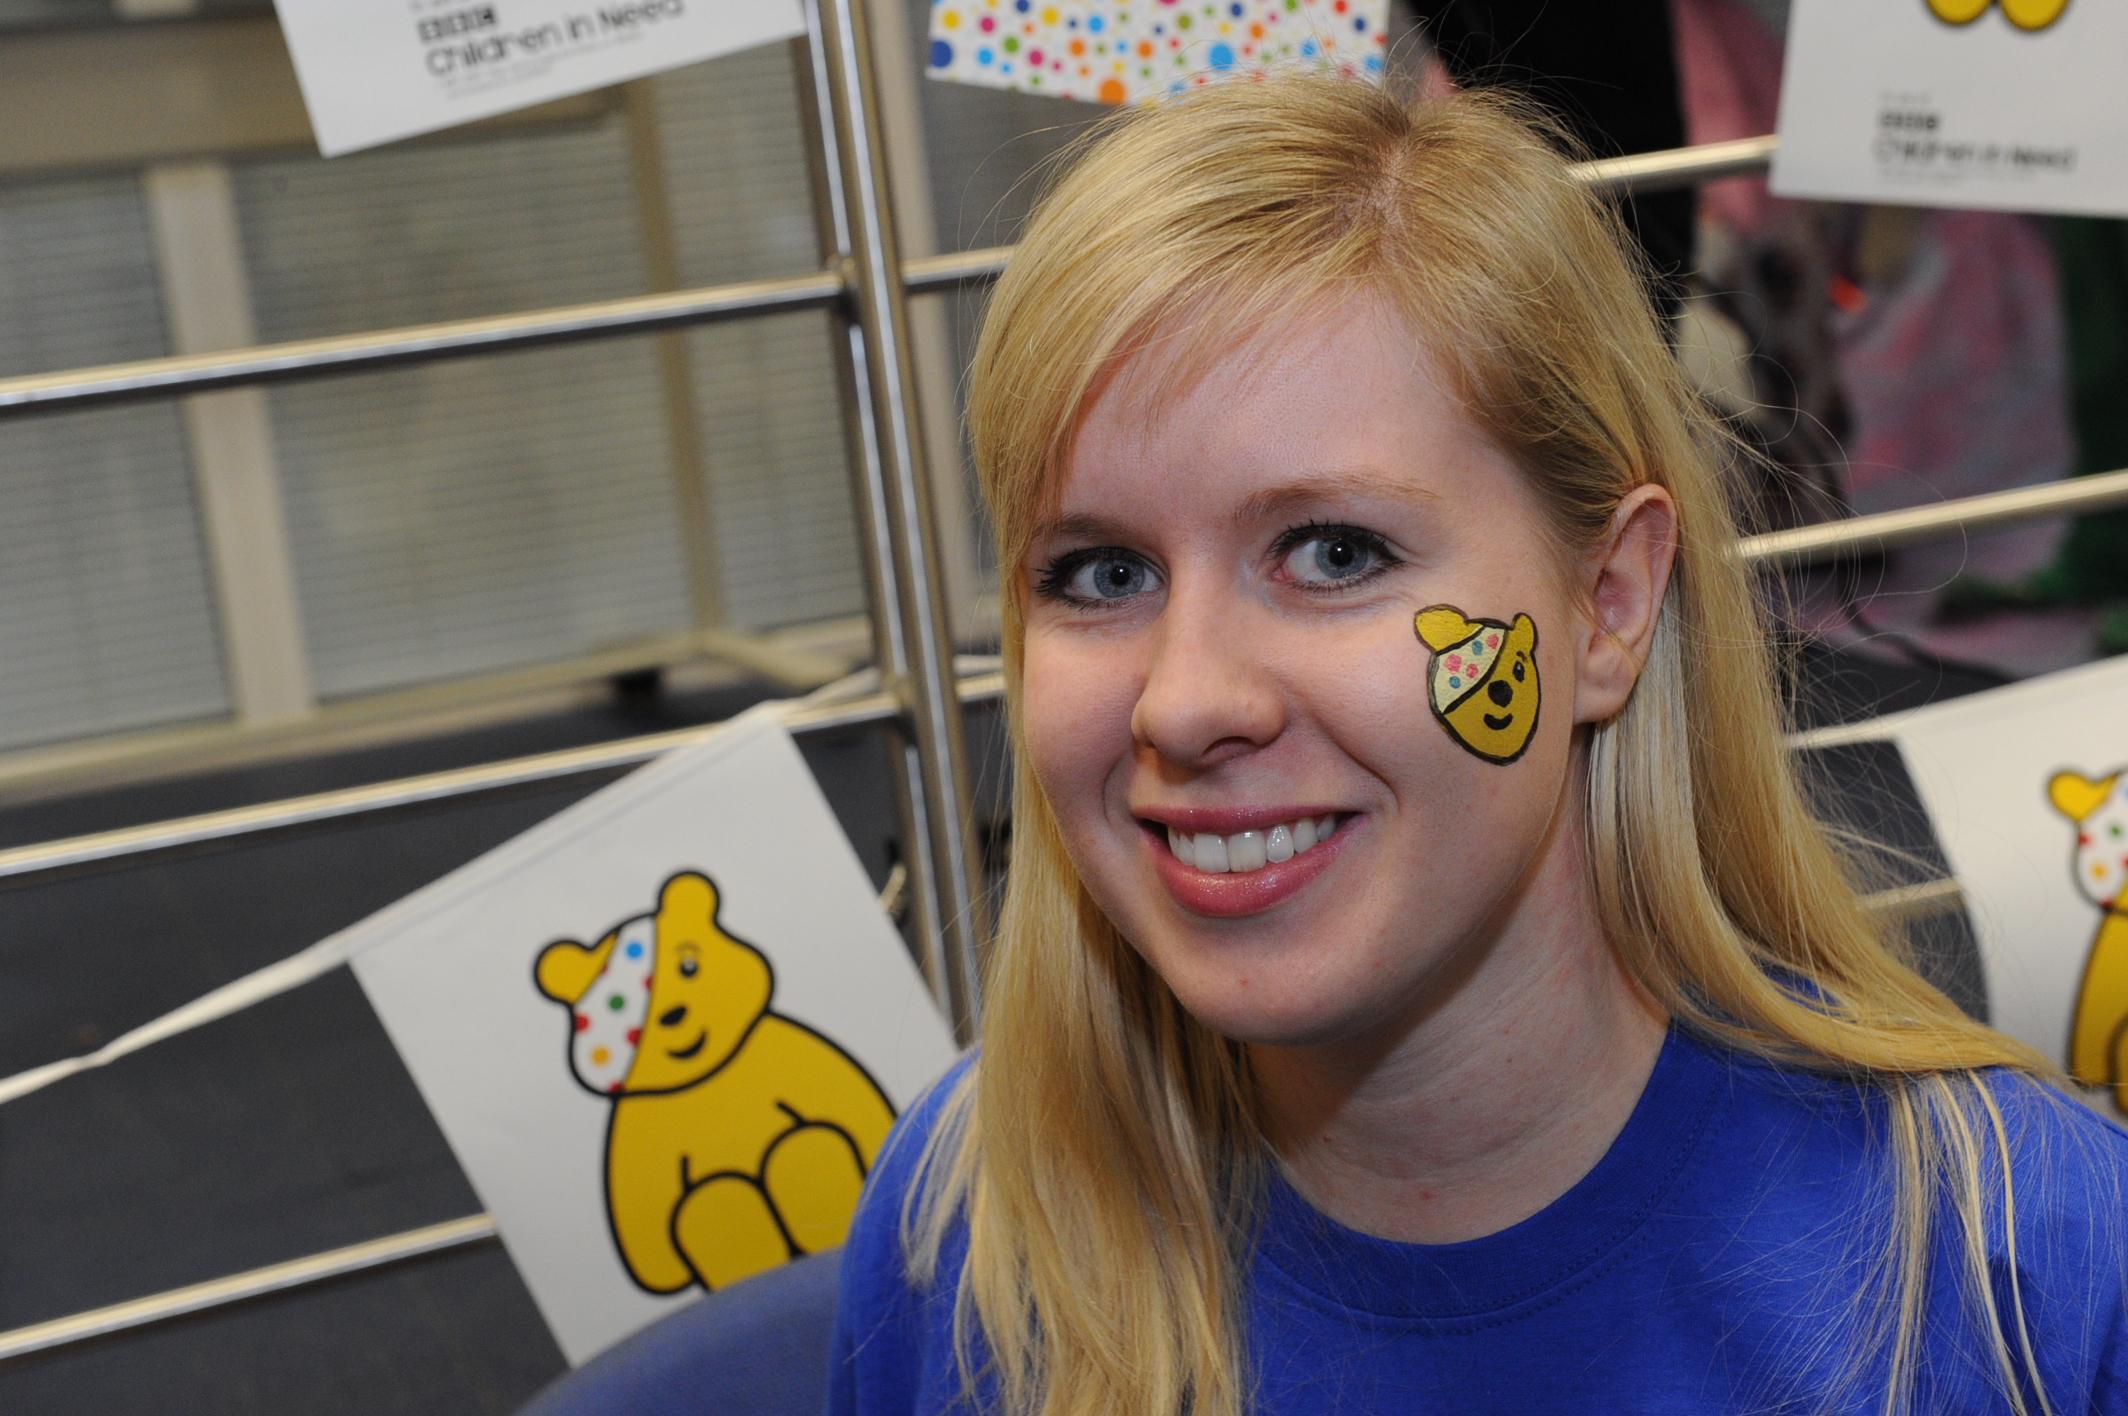 Screwfix To Take Calls For BBC Children In Need